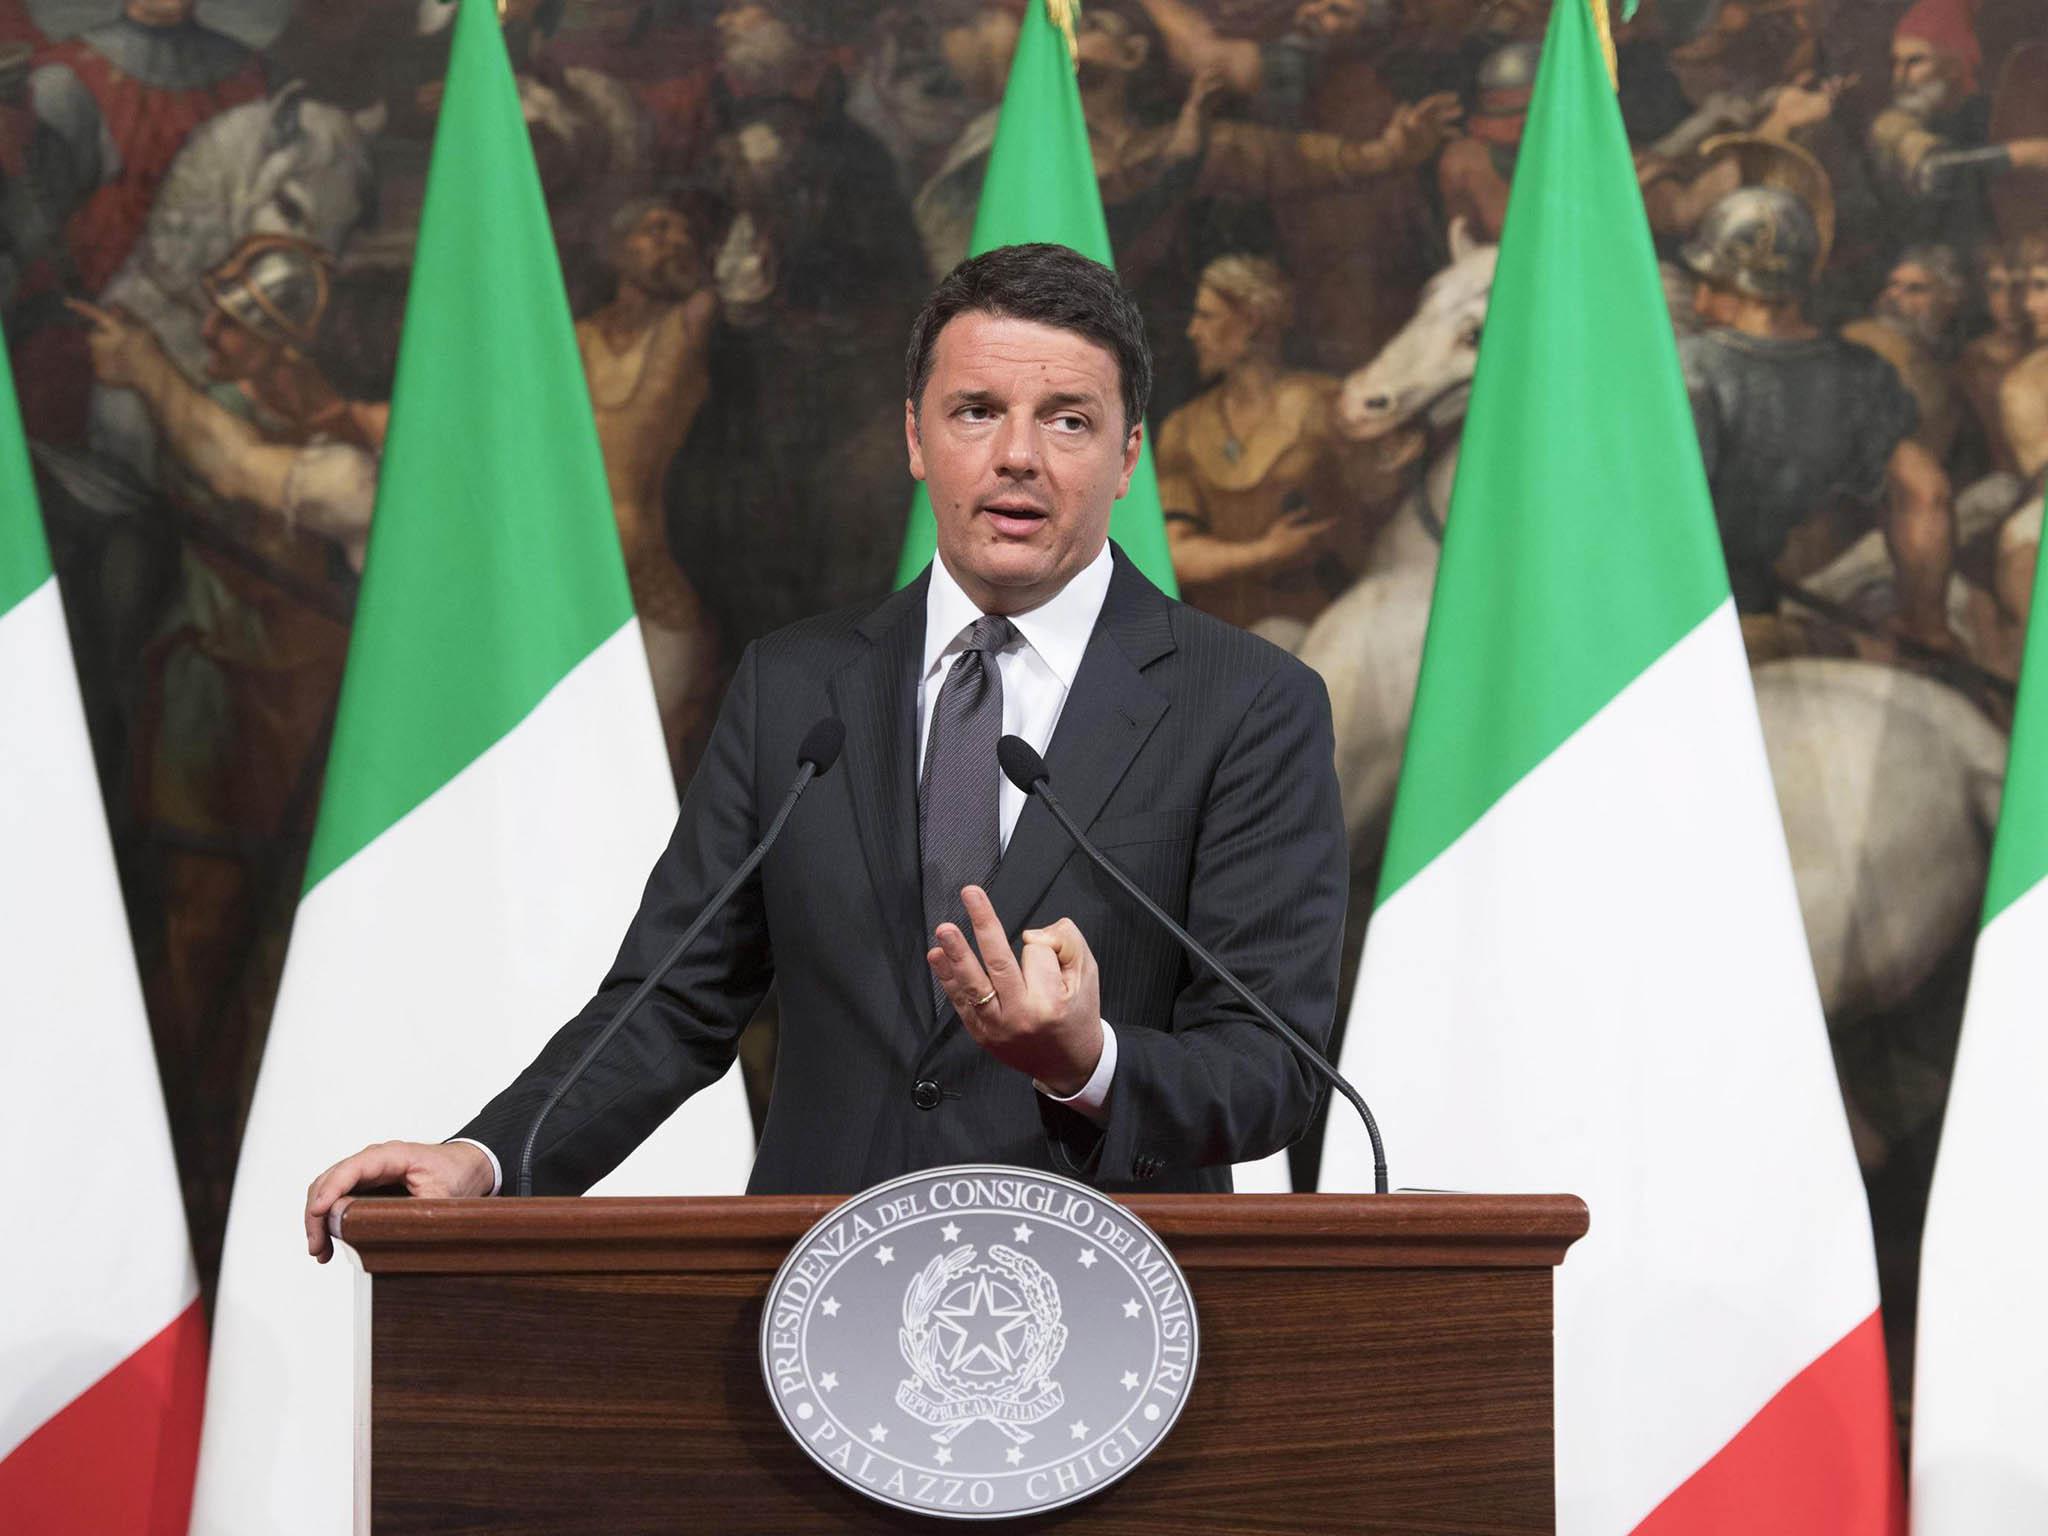 Matteo Renzi has promised to resign if he loses the Italian referendum this weekend